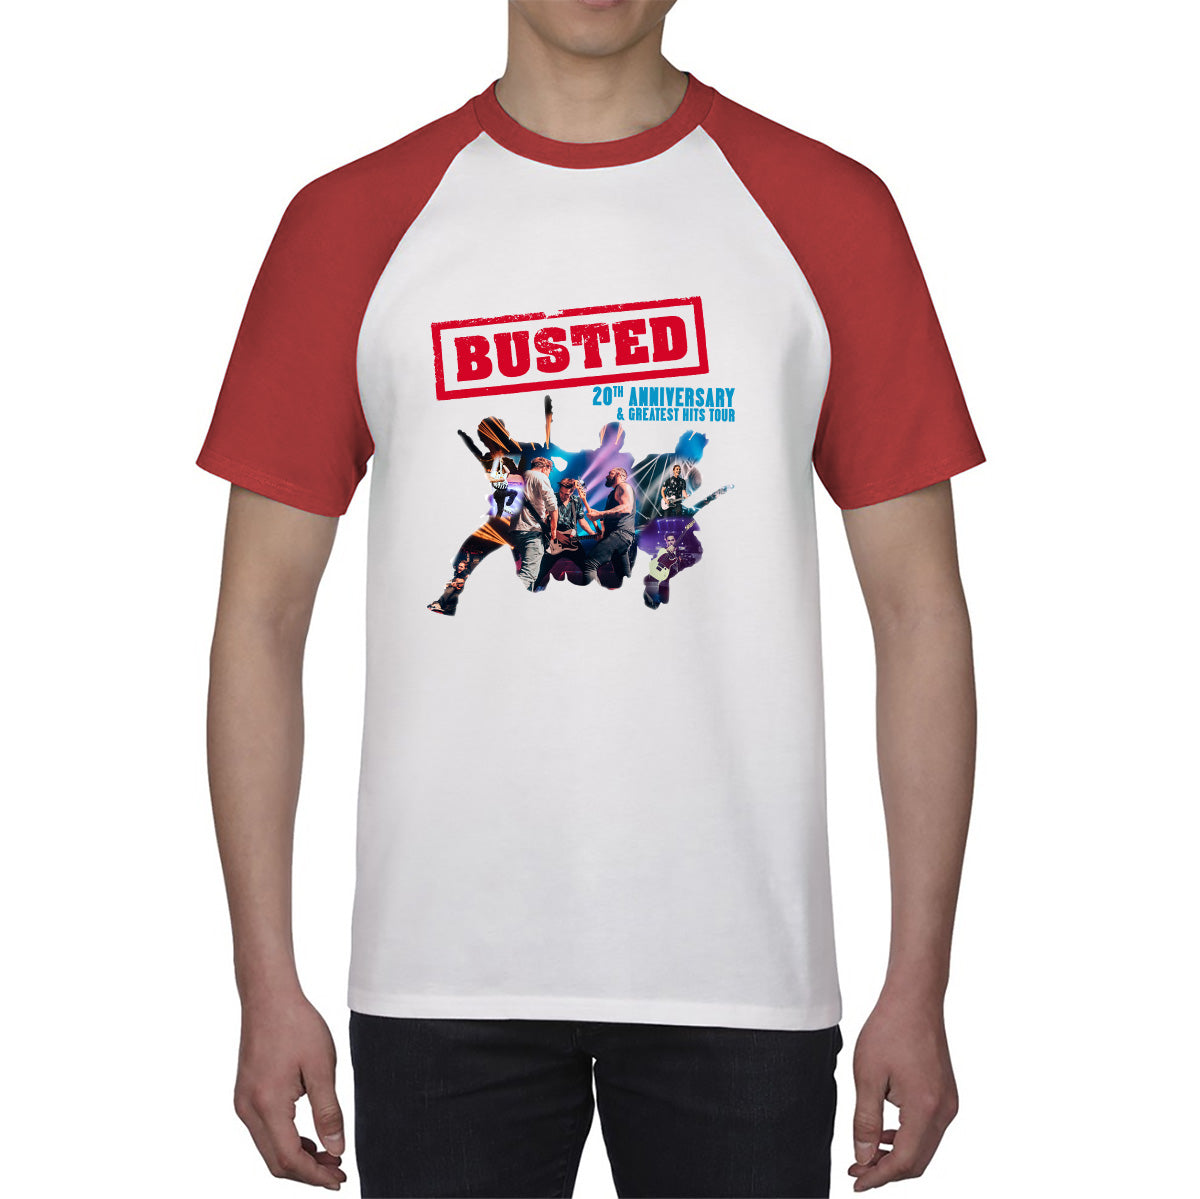 Busted 20th Anniversary & Greatest Hits Tour Busted Singers Pop Punk Music Band Baseball T Shirt